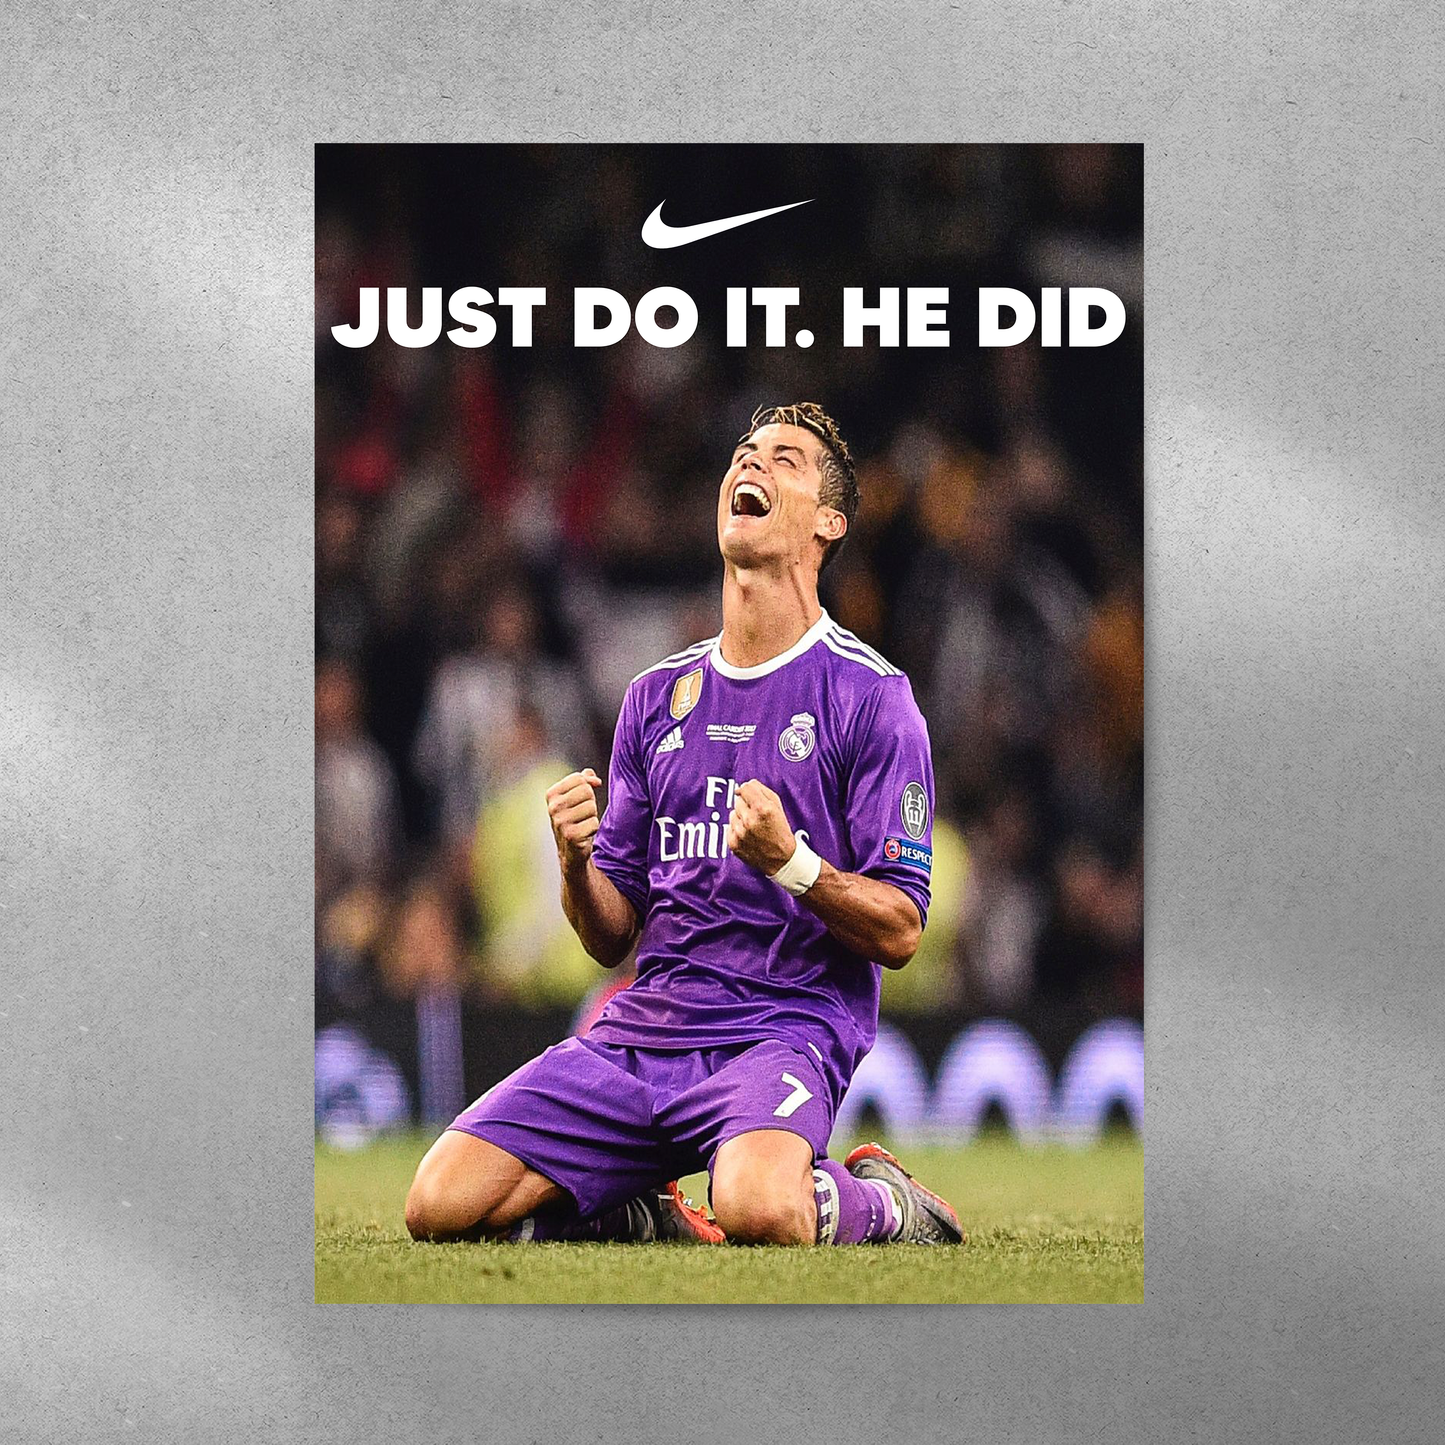 Just Do It. He Did